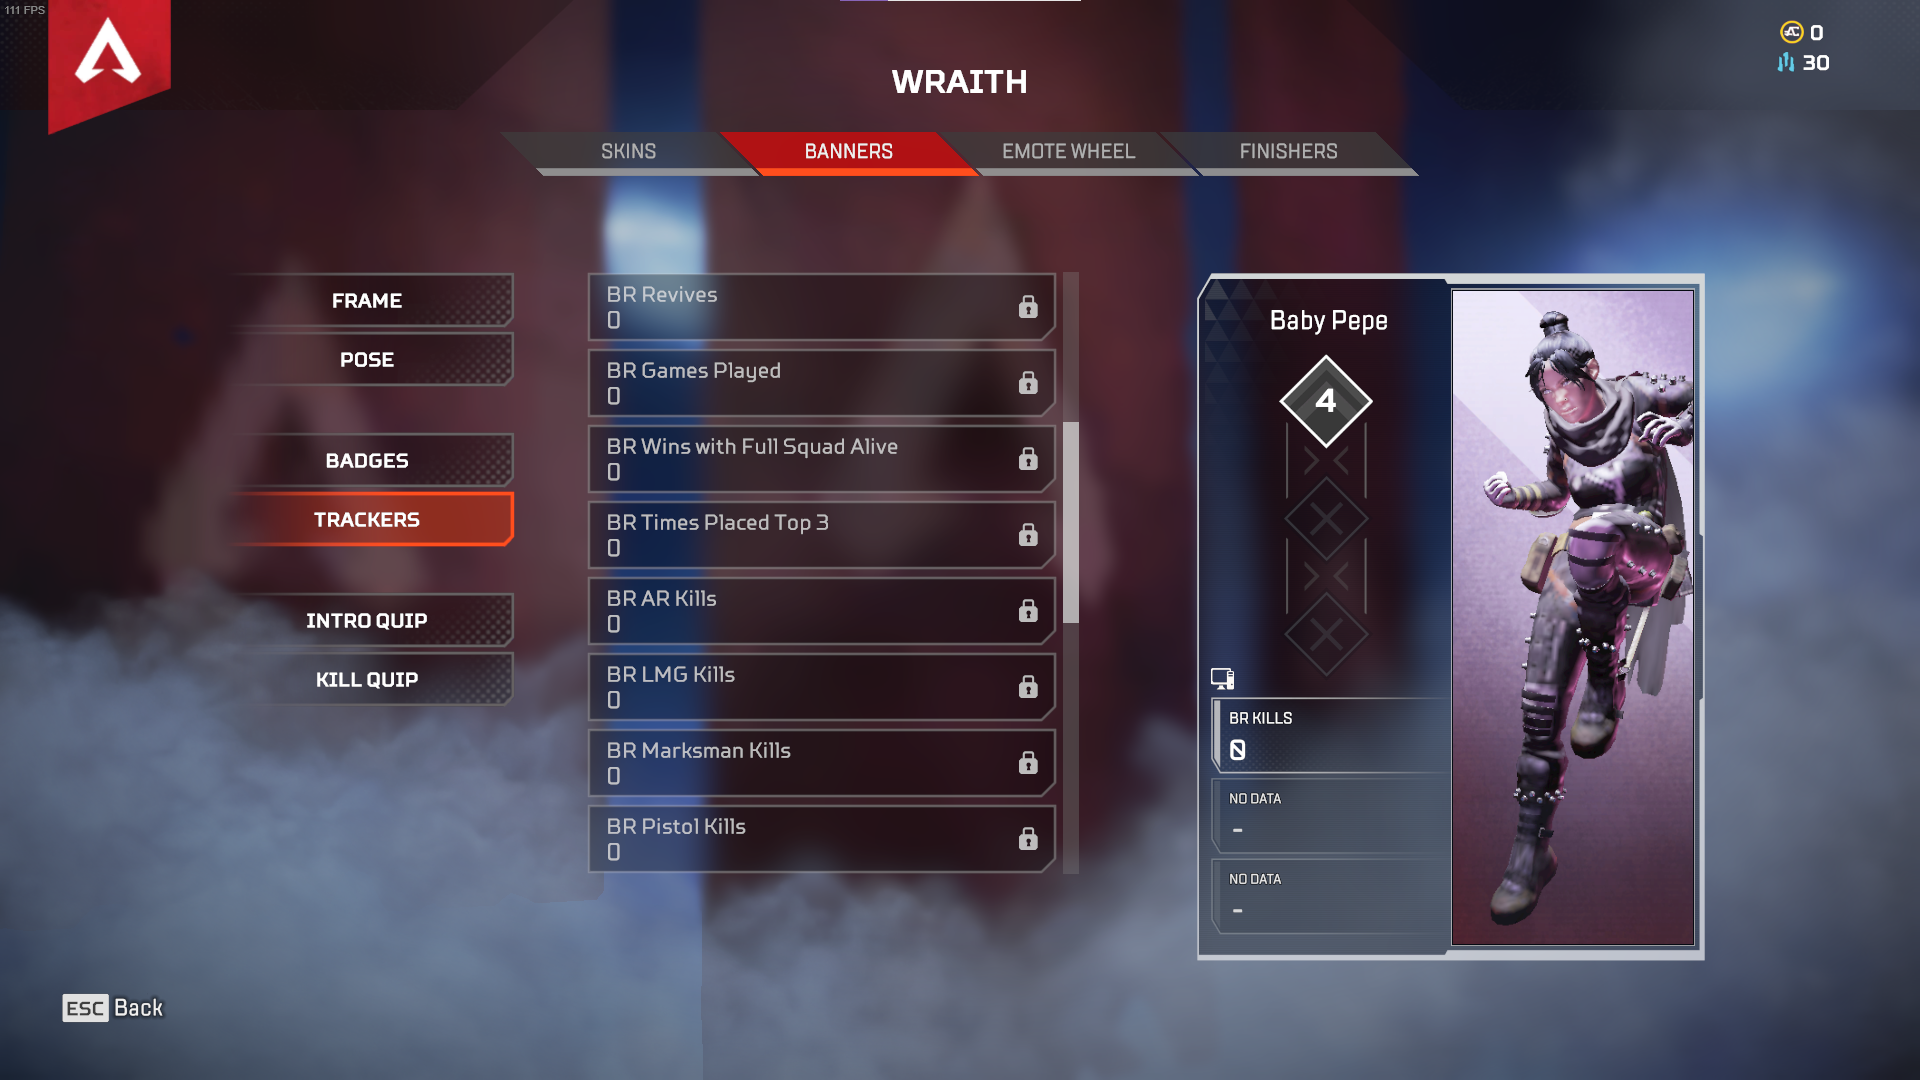 How to Check Your Stats in Apex Legends